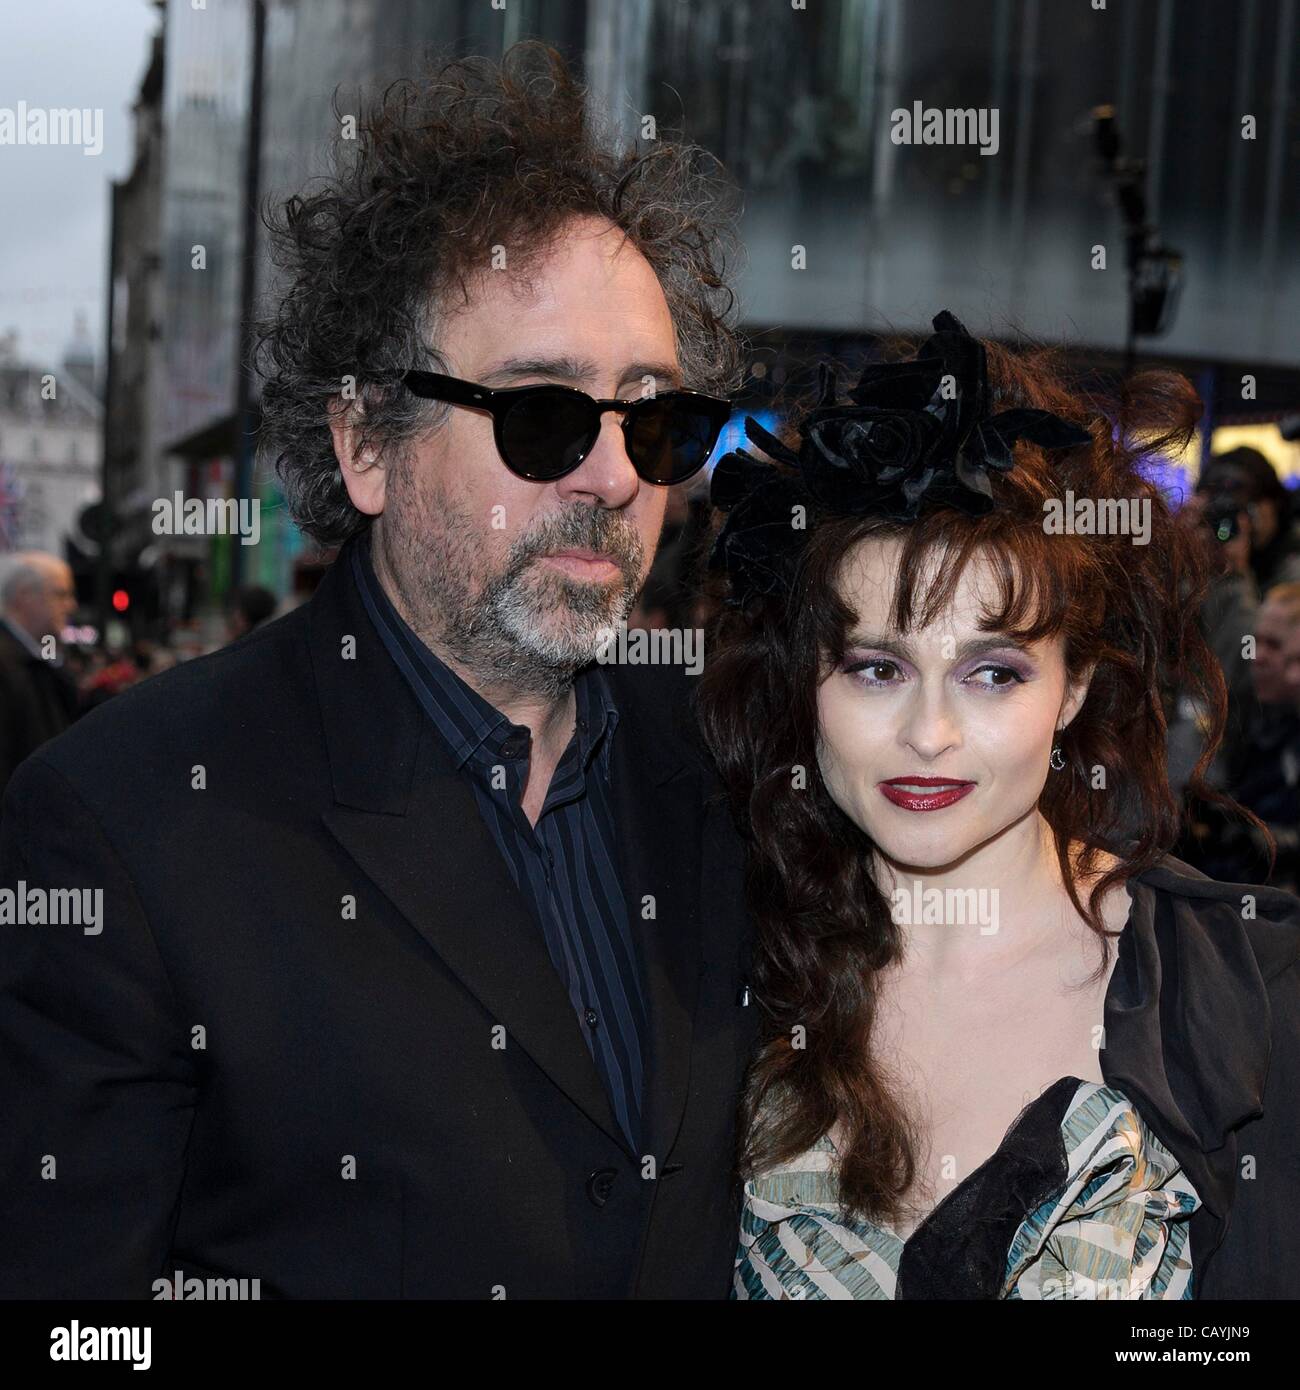 Director Tim Burton attends the European Premiere of Dark Shadows with his actress wife Helena Bonham-Carter at The Empire, Leicester Square on  9th May 2012. Persons pictured: Helena Bonham-Carter, Tim Burton. Picture by Julie Edwards Stock Photo